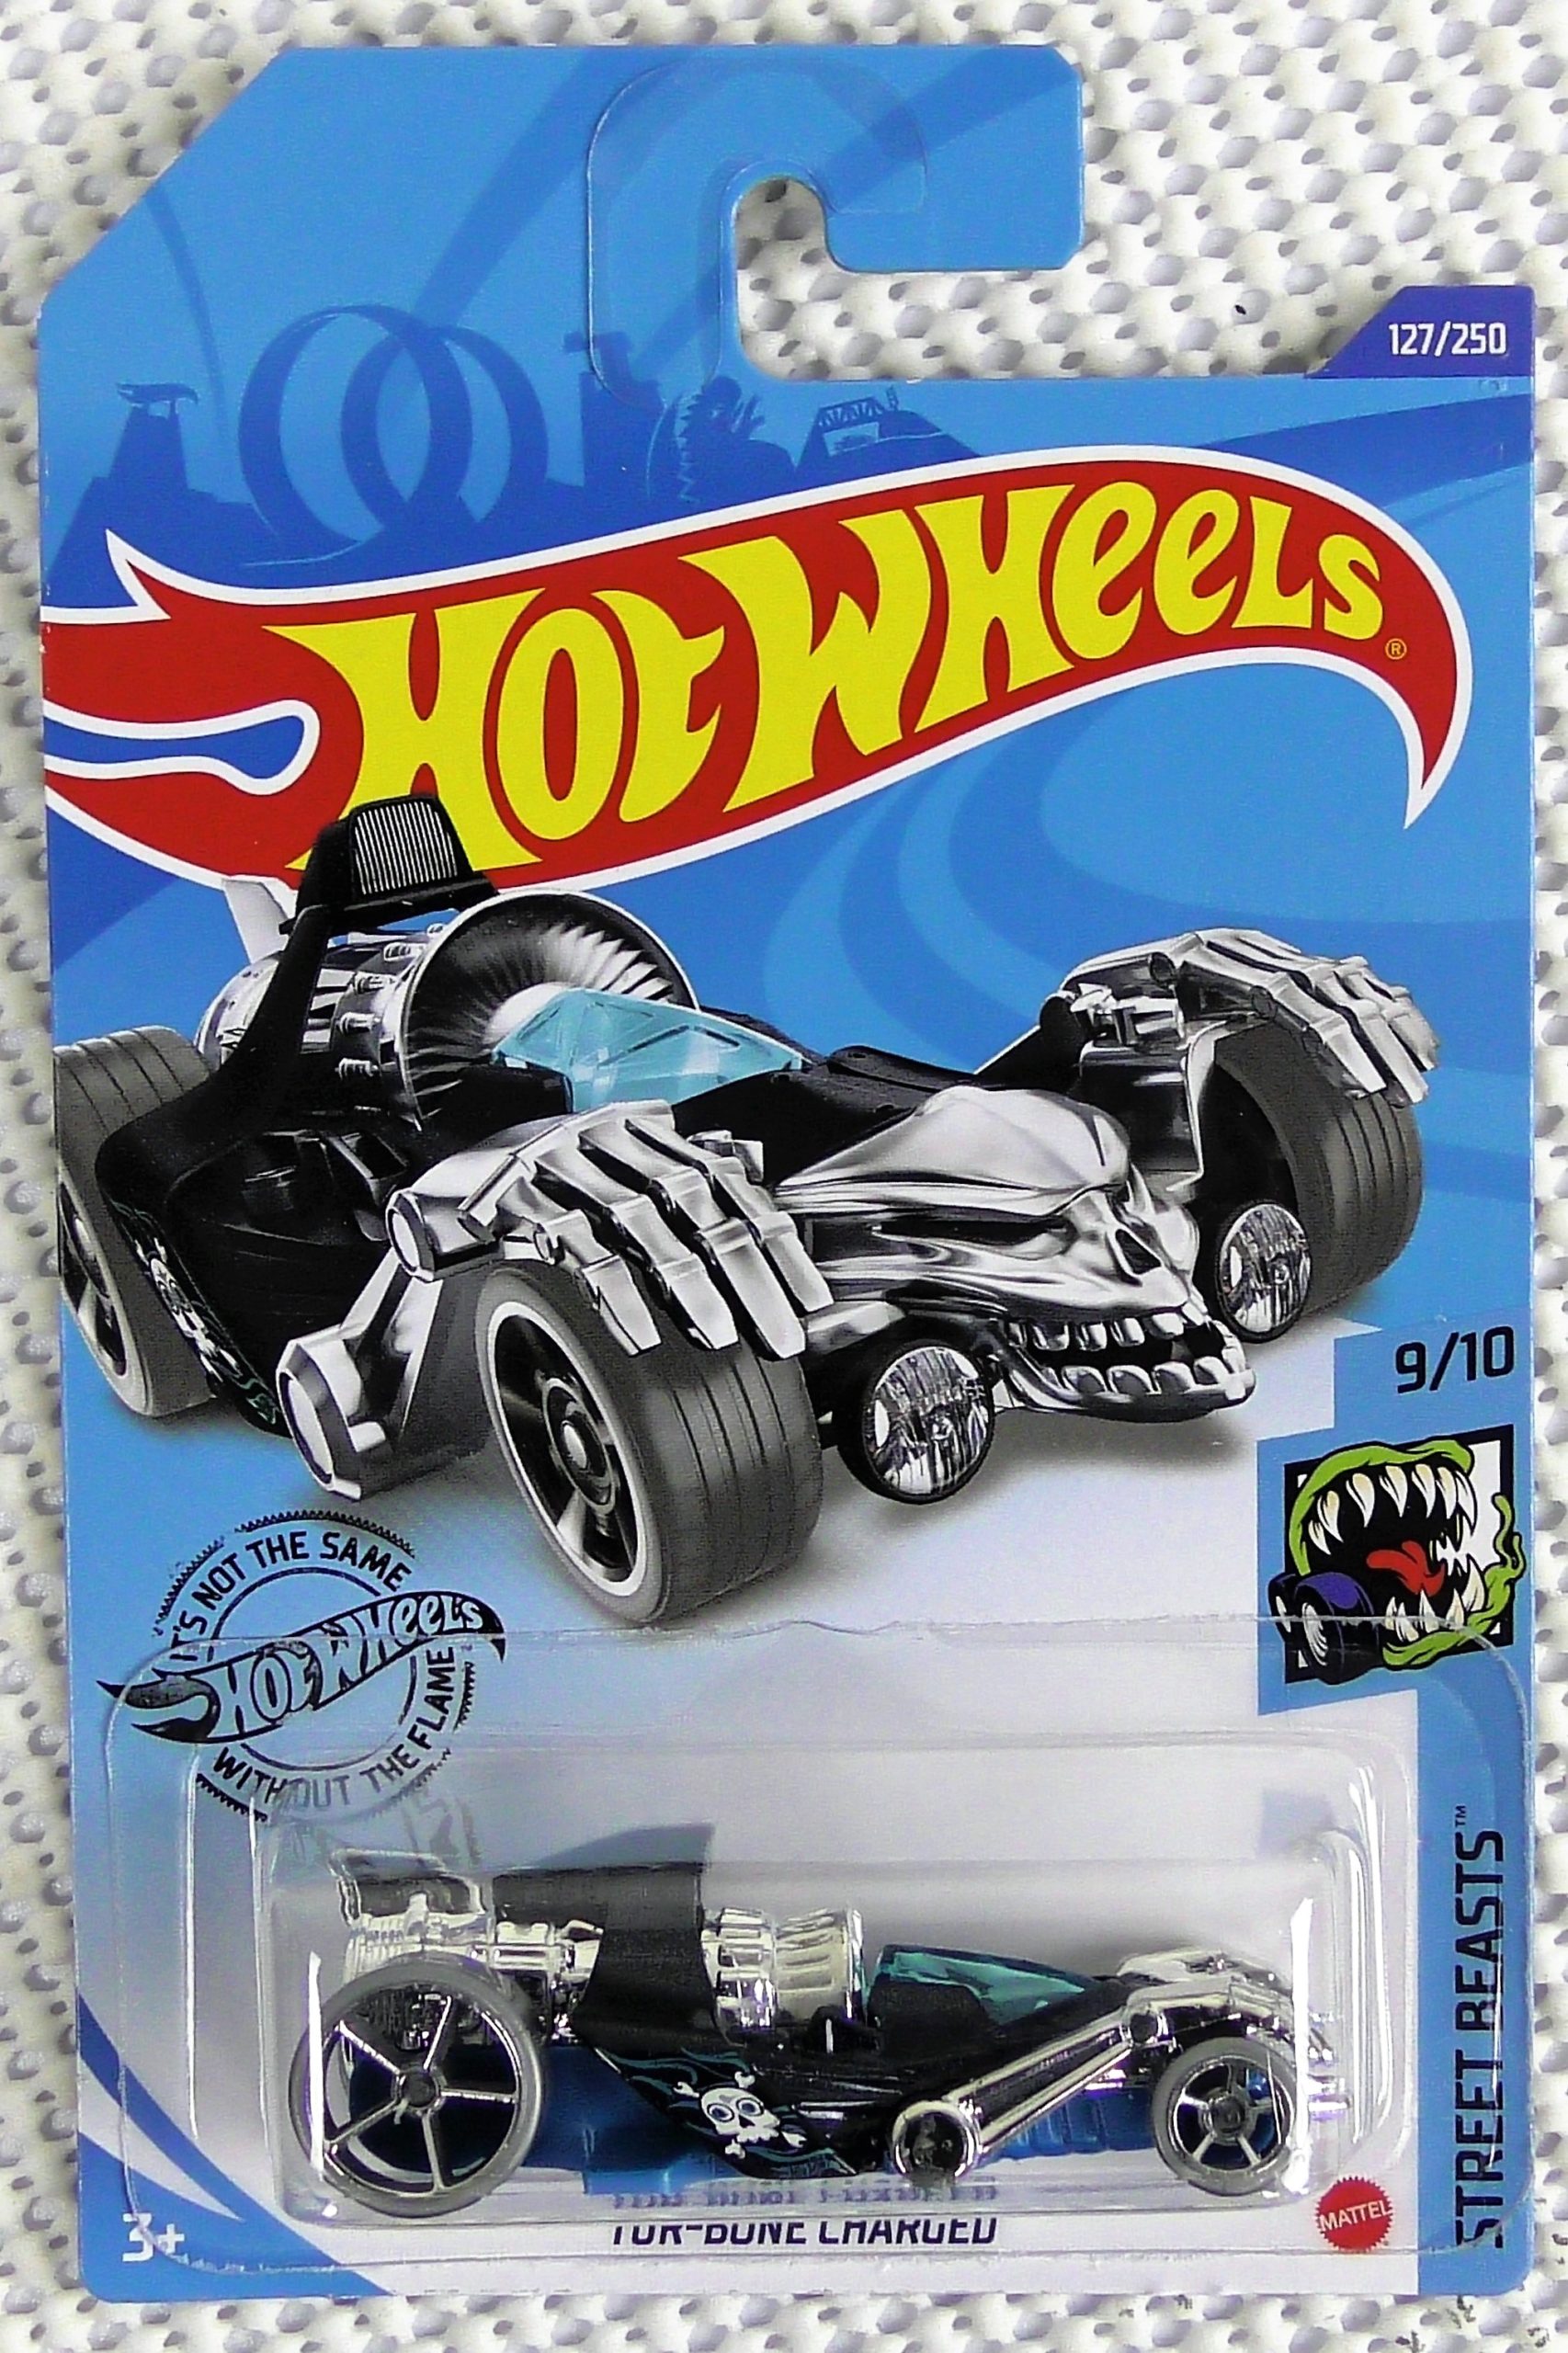 2020 Hot Wheels Price Guide.